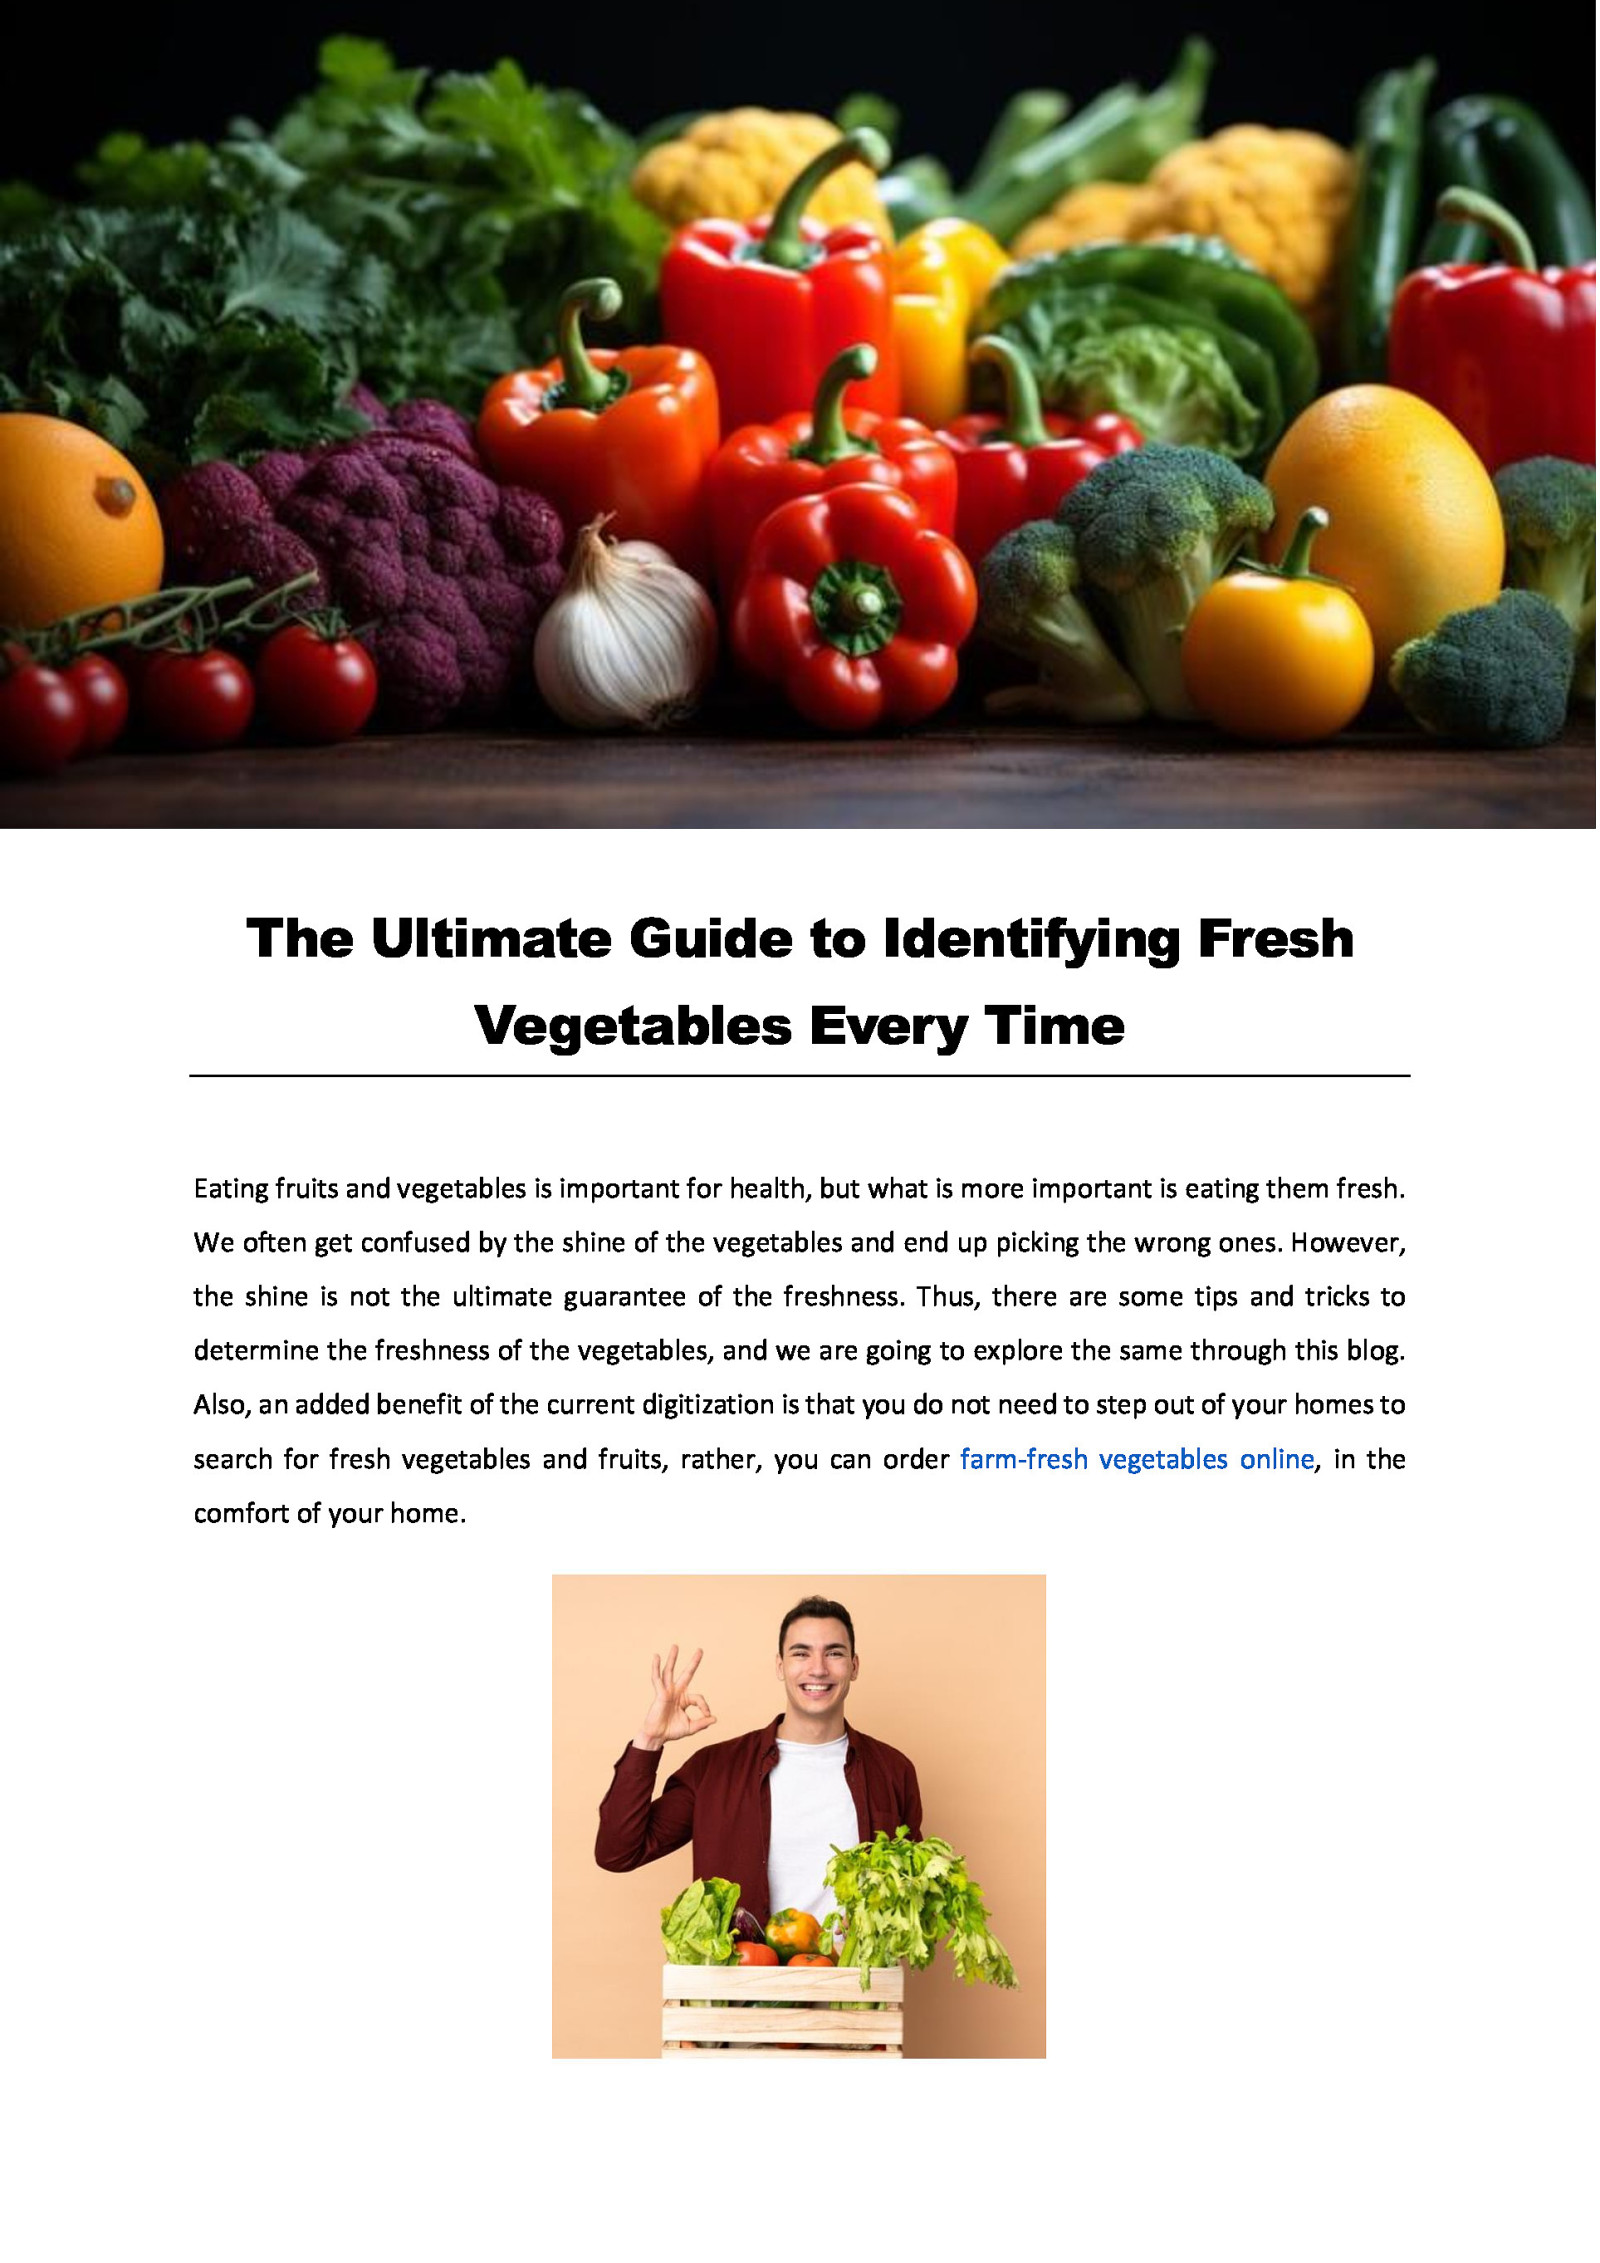 The Ultimate Guide to Identifying Fresh Vegetables Every Time